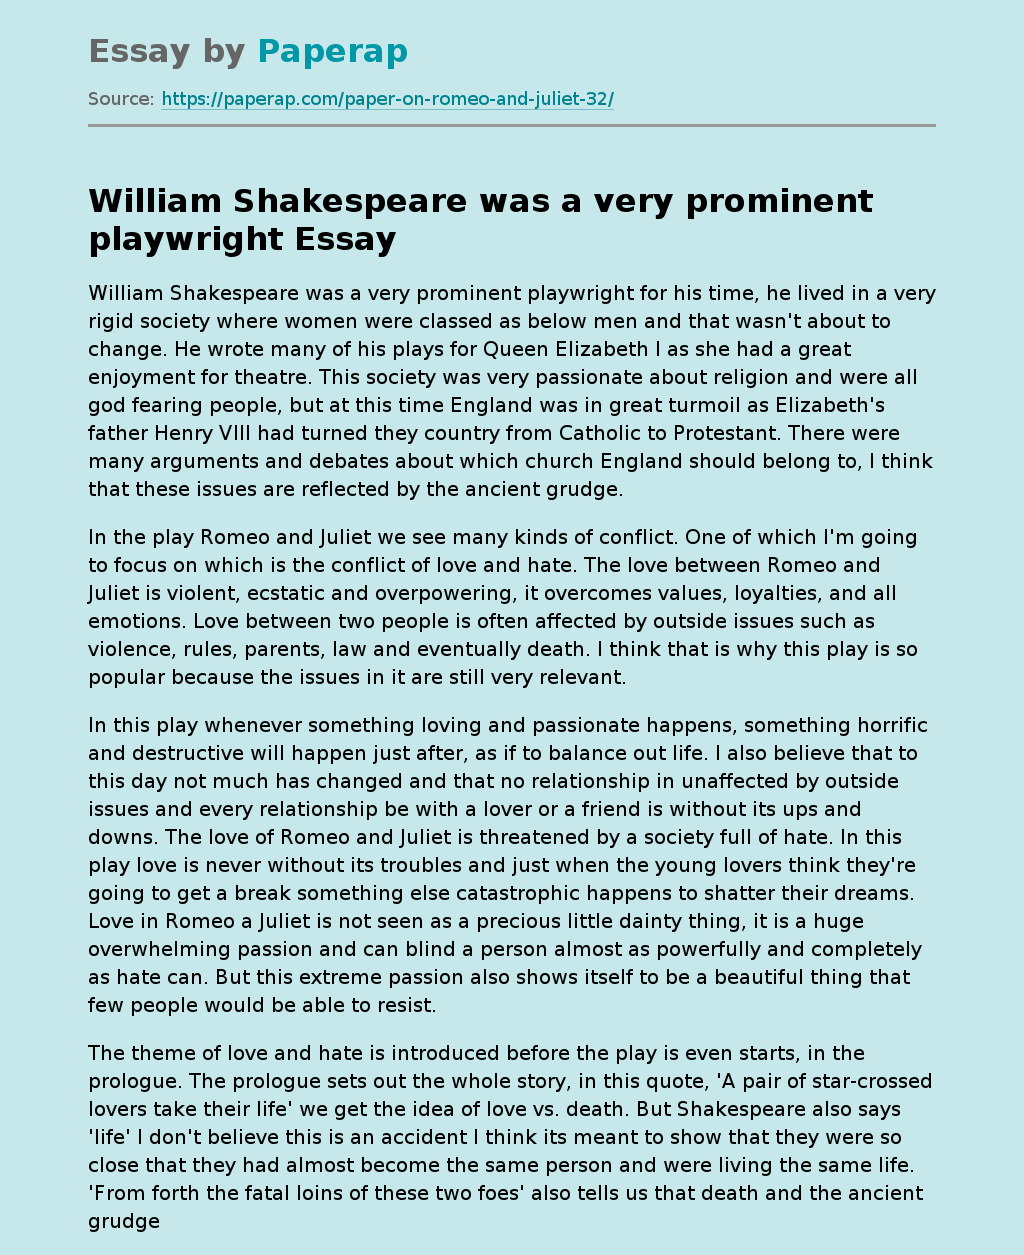 William Shakespeare Was a very Prominent Playwright